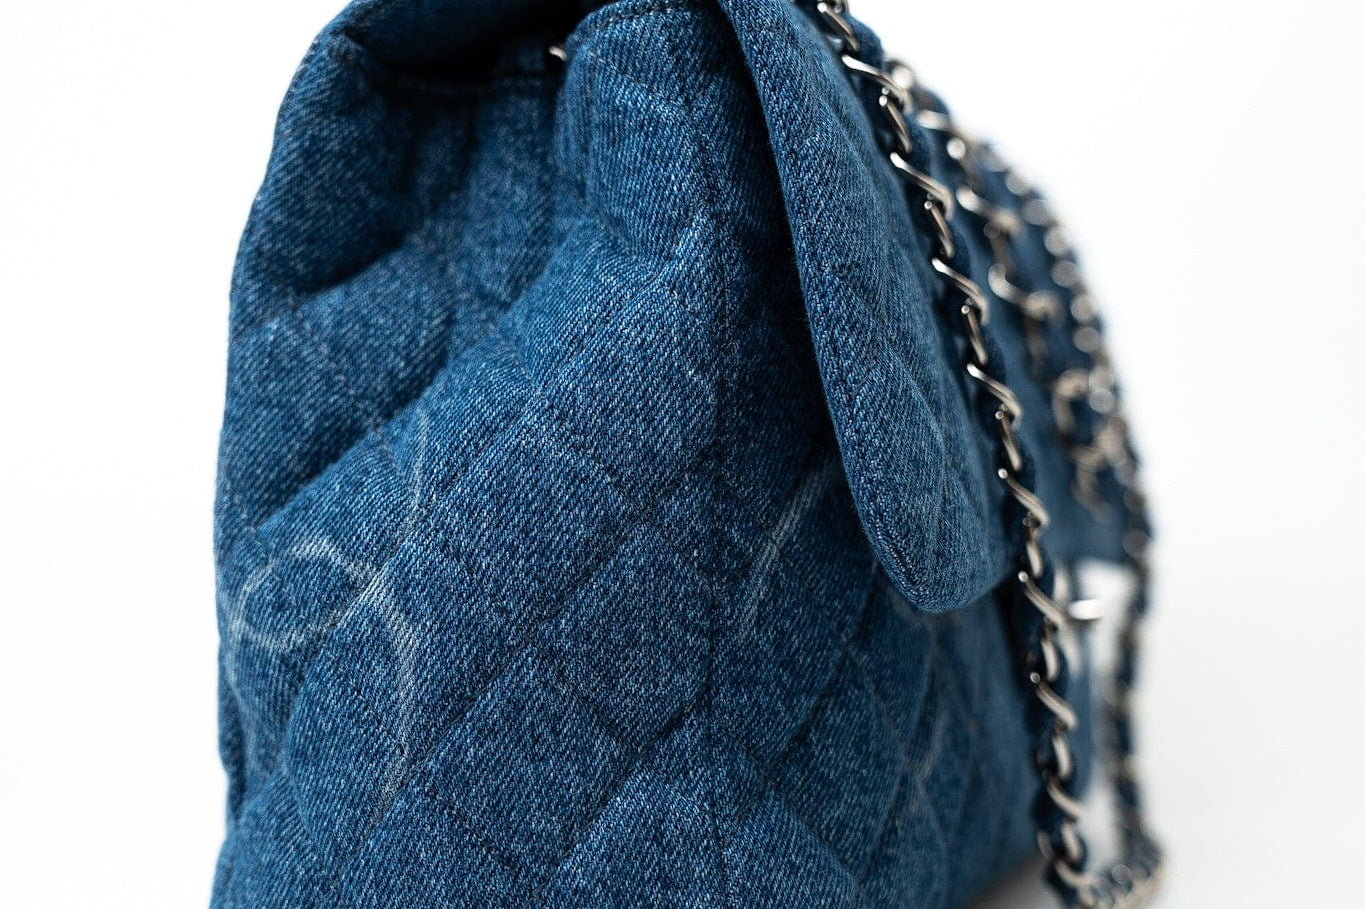 CHANEL Handbag 20B Blue Denim Quilted CC Classic Flap Jumbo SHW - Redeluxe